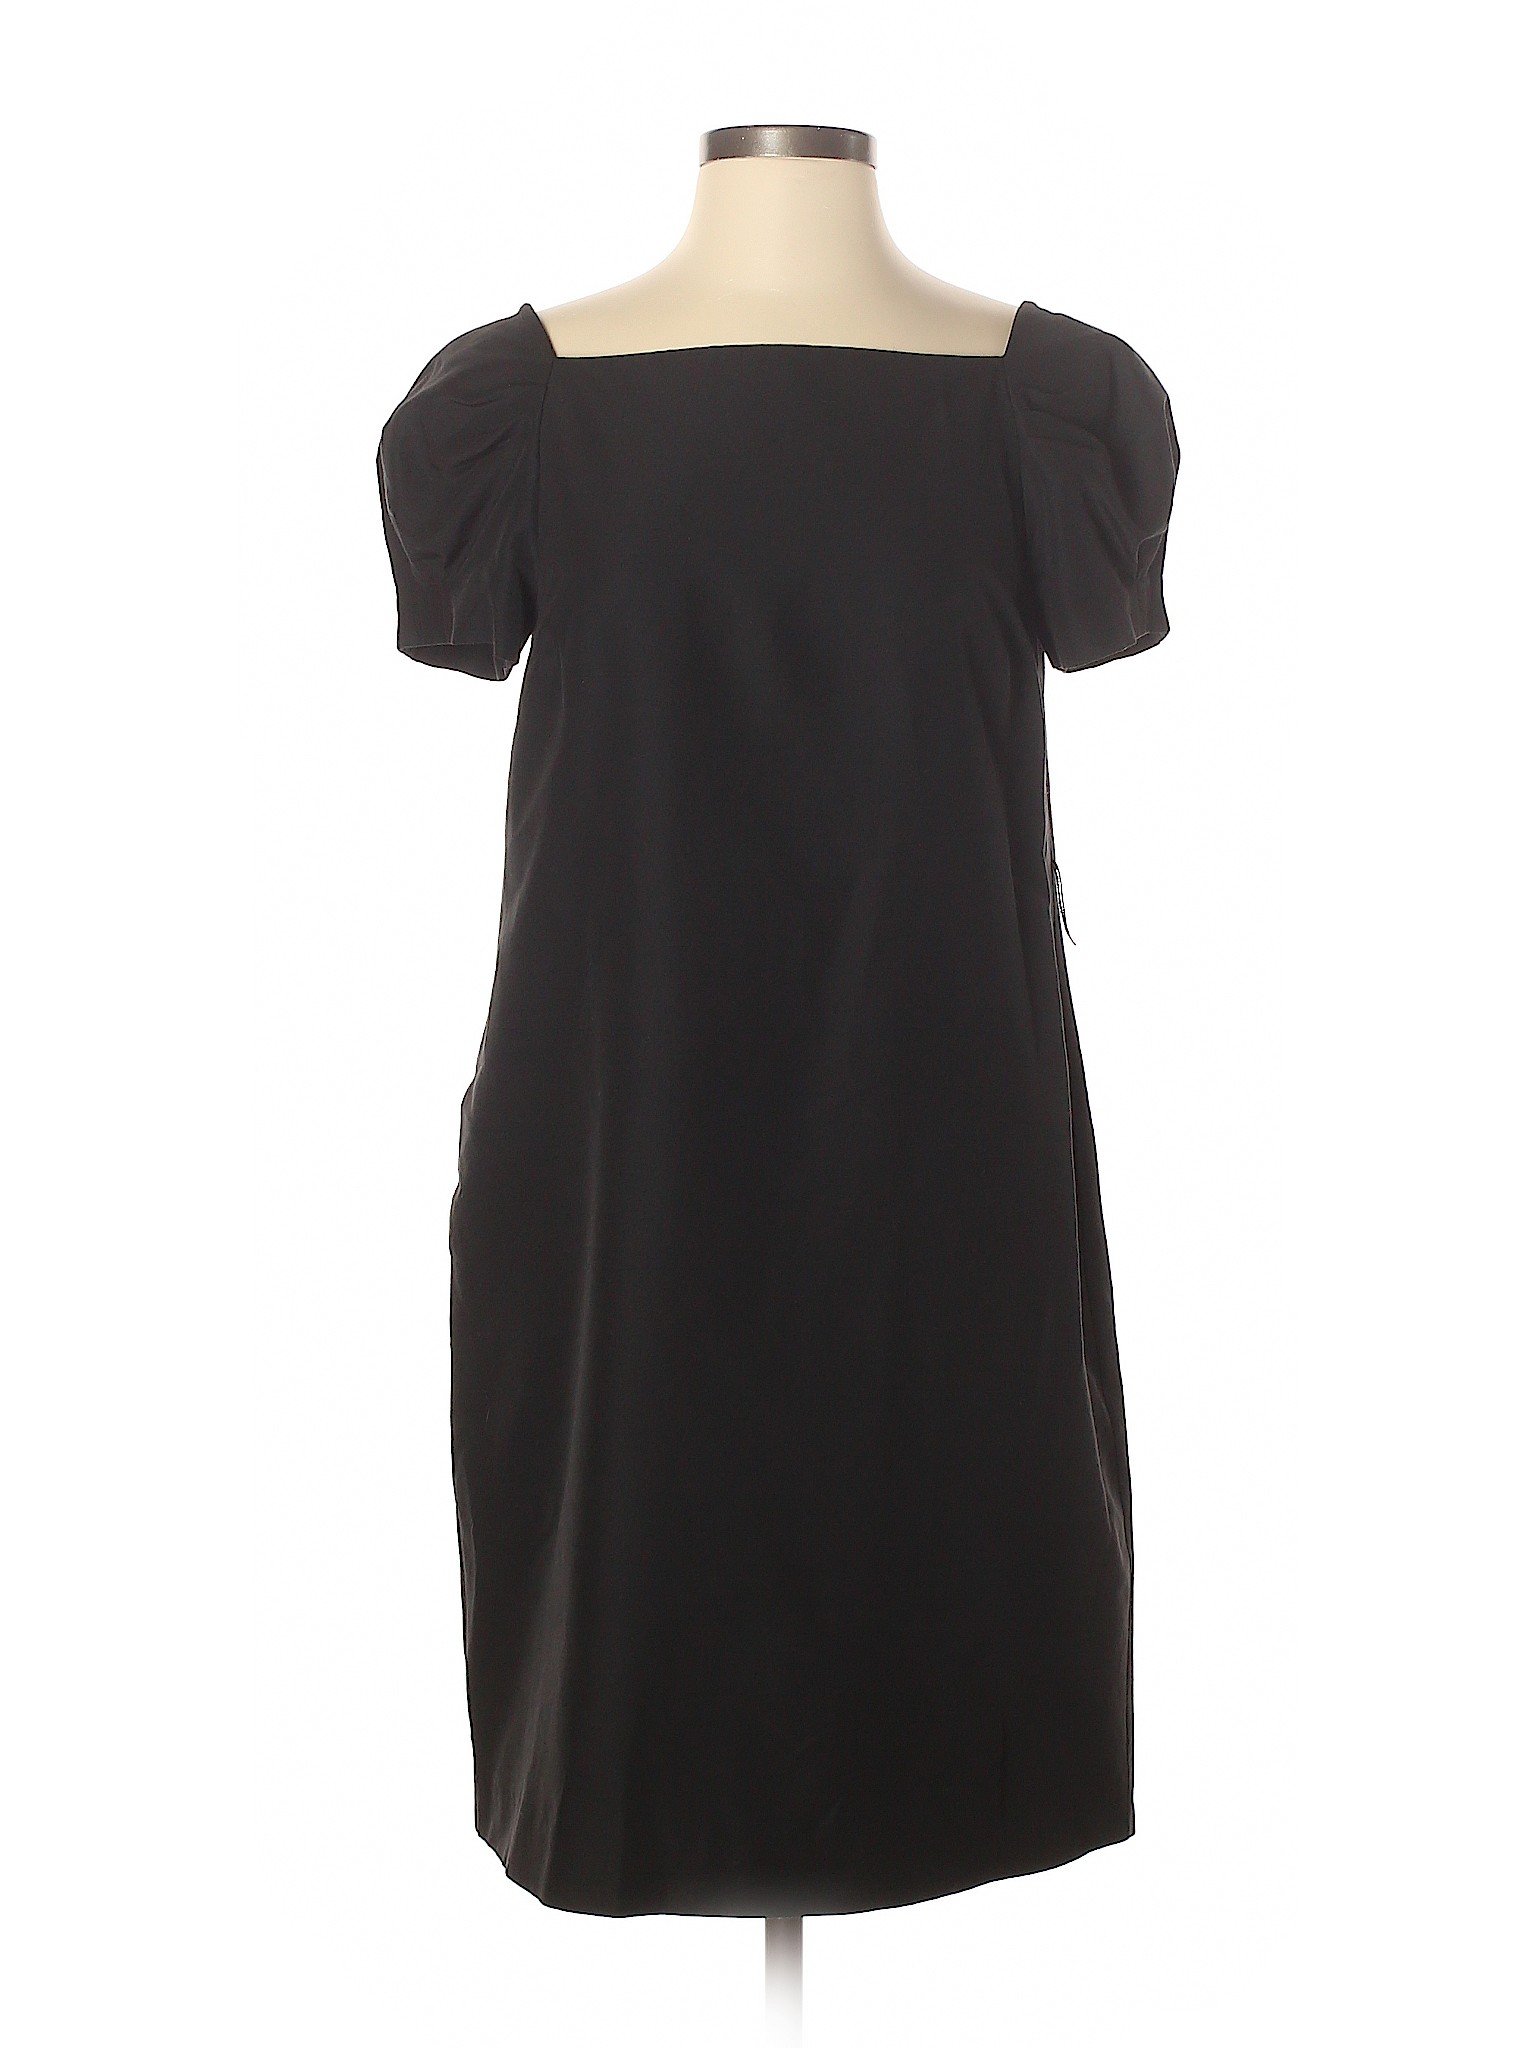 J.Crew Collection Solid Black Casual Dress Size 4 - 92% off | thredUP